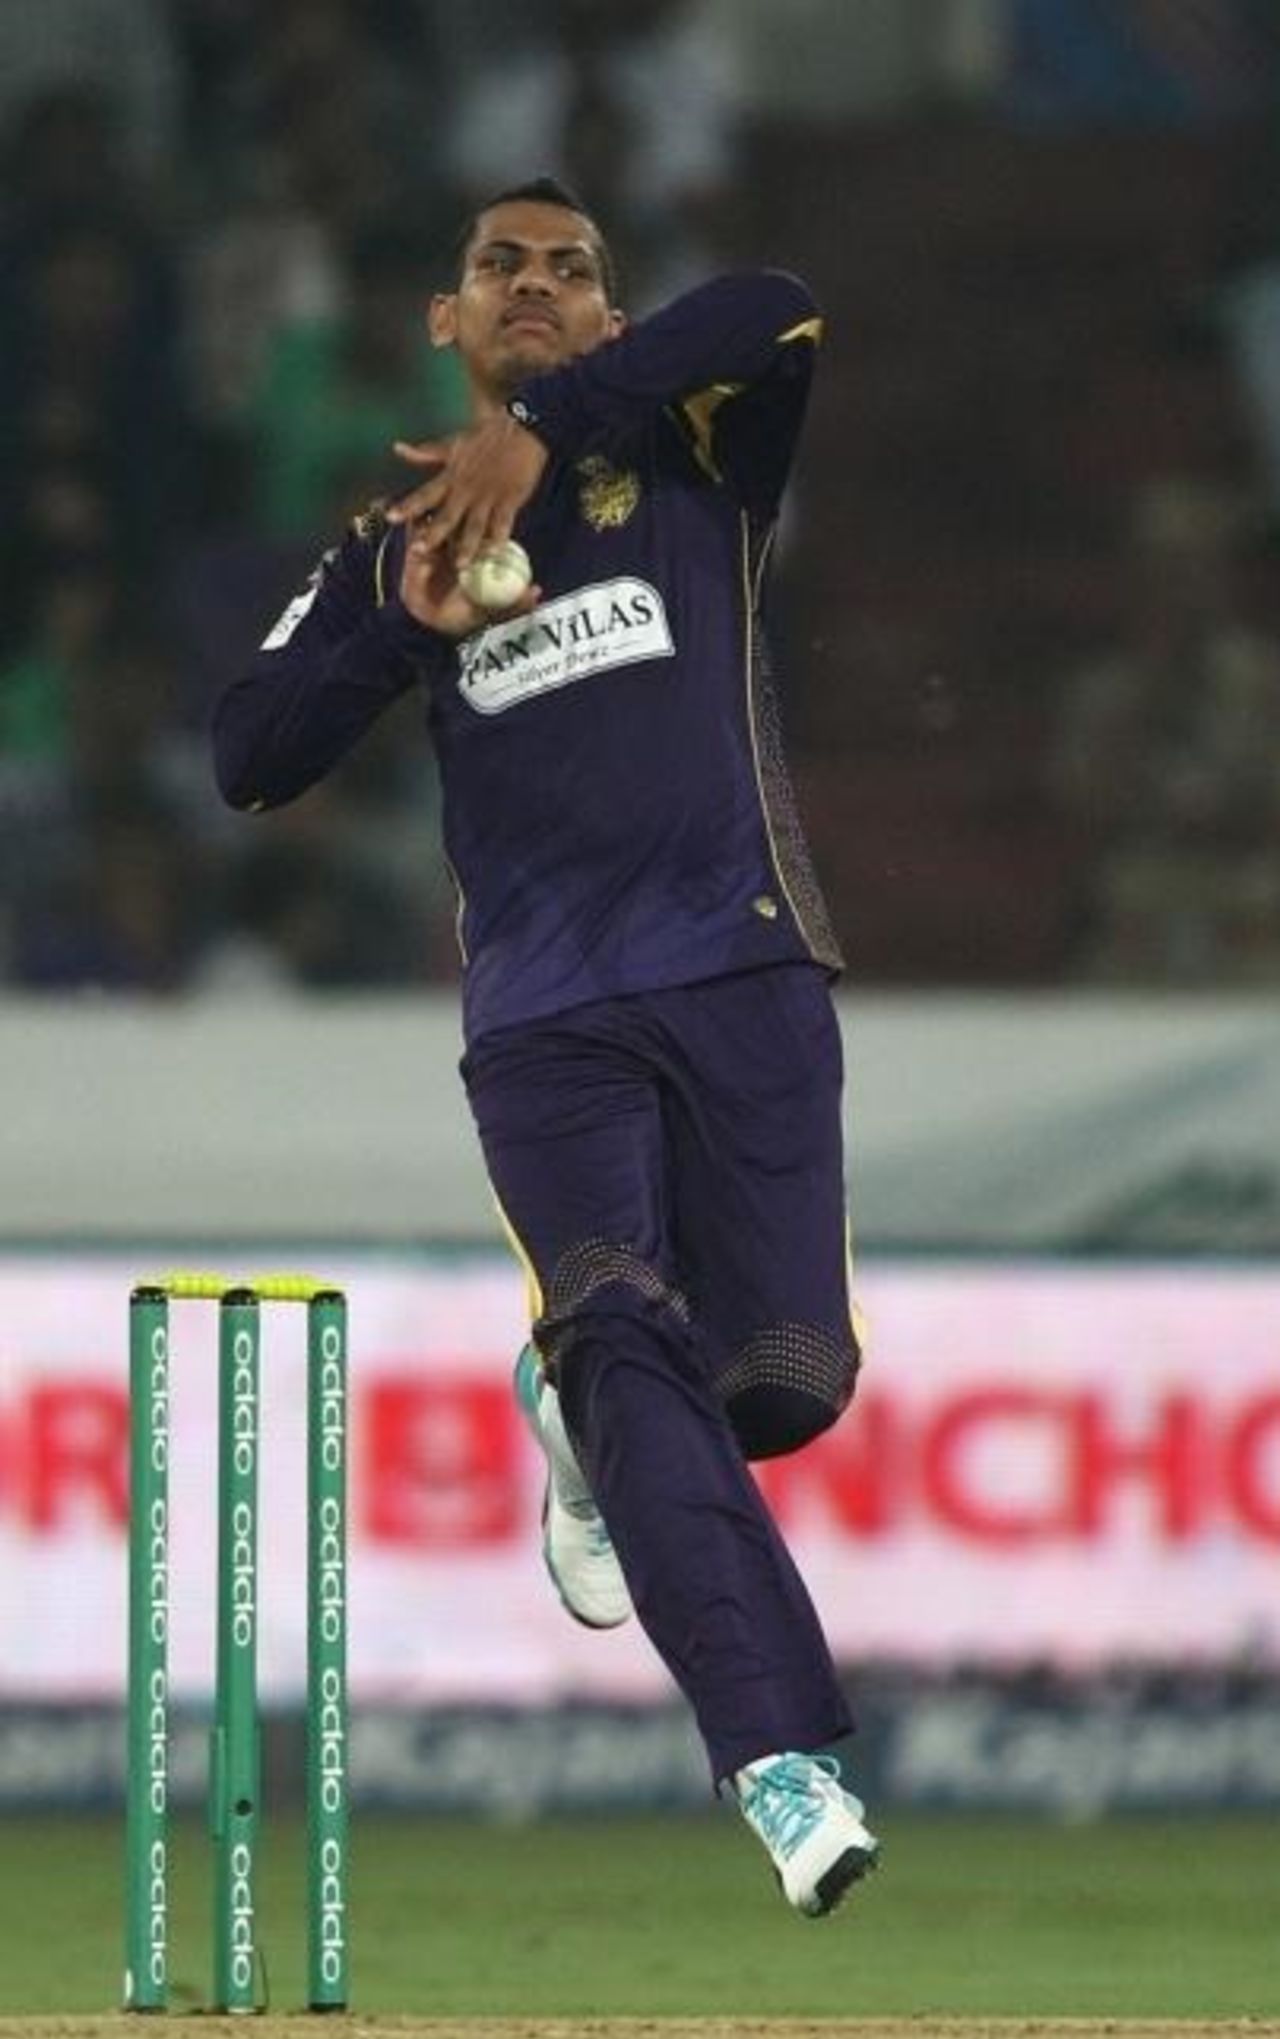 Sunil Narine approaches the crease during his spell, Dolphins v Kolkata Knight Riders, Champions League T20, Group A, Hyderabad, September 29, 2014